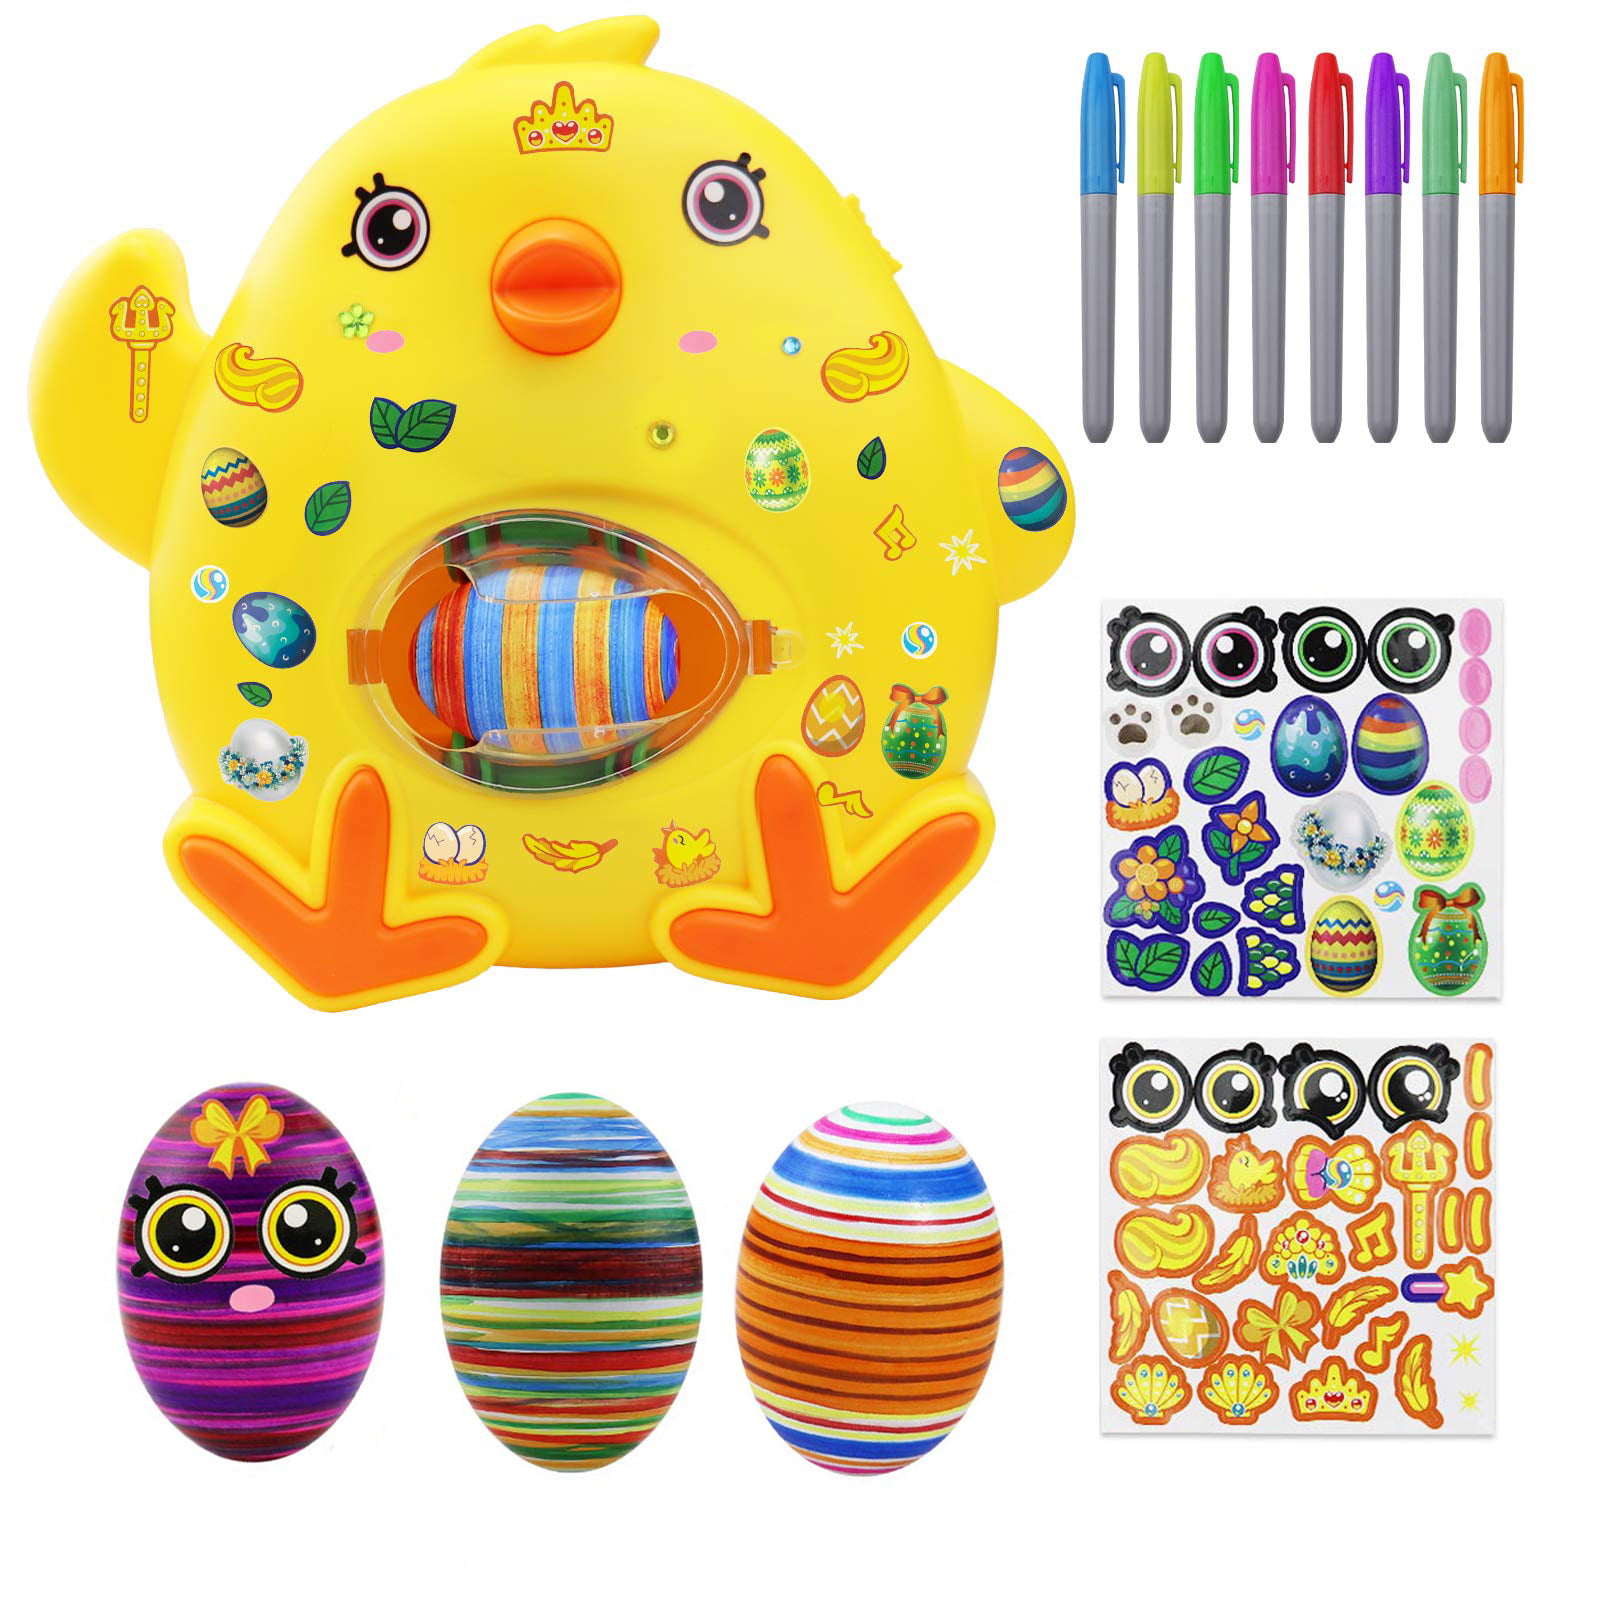 Easter Egg Coloring Kits Machine with 3 Eggs 8 Markers-Easter Egg Decorating Kit